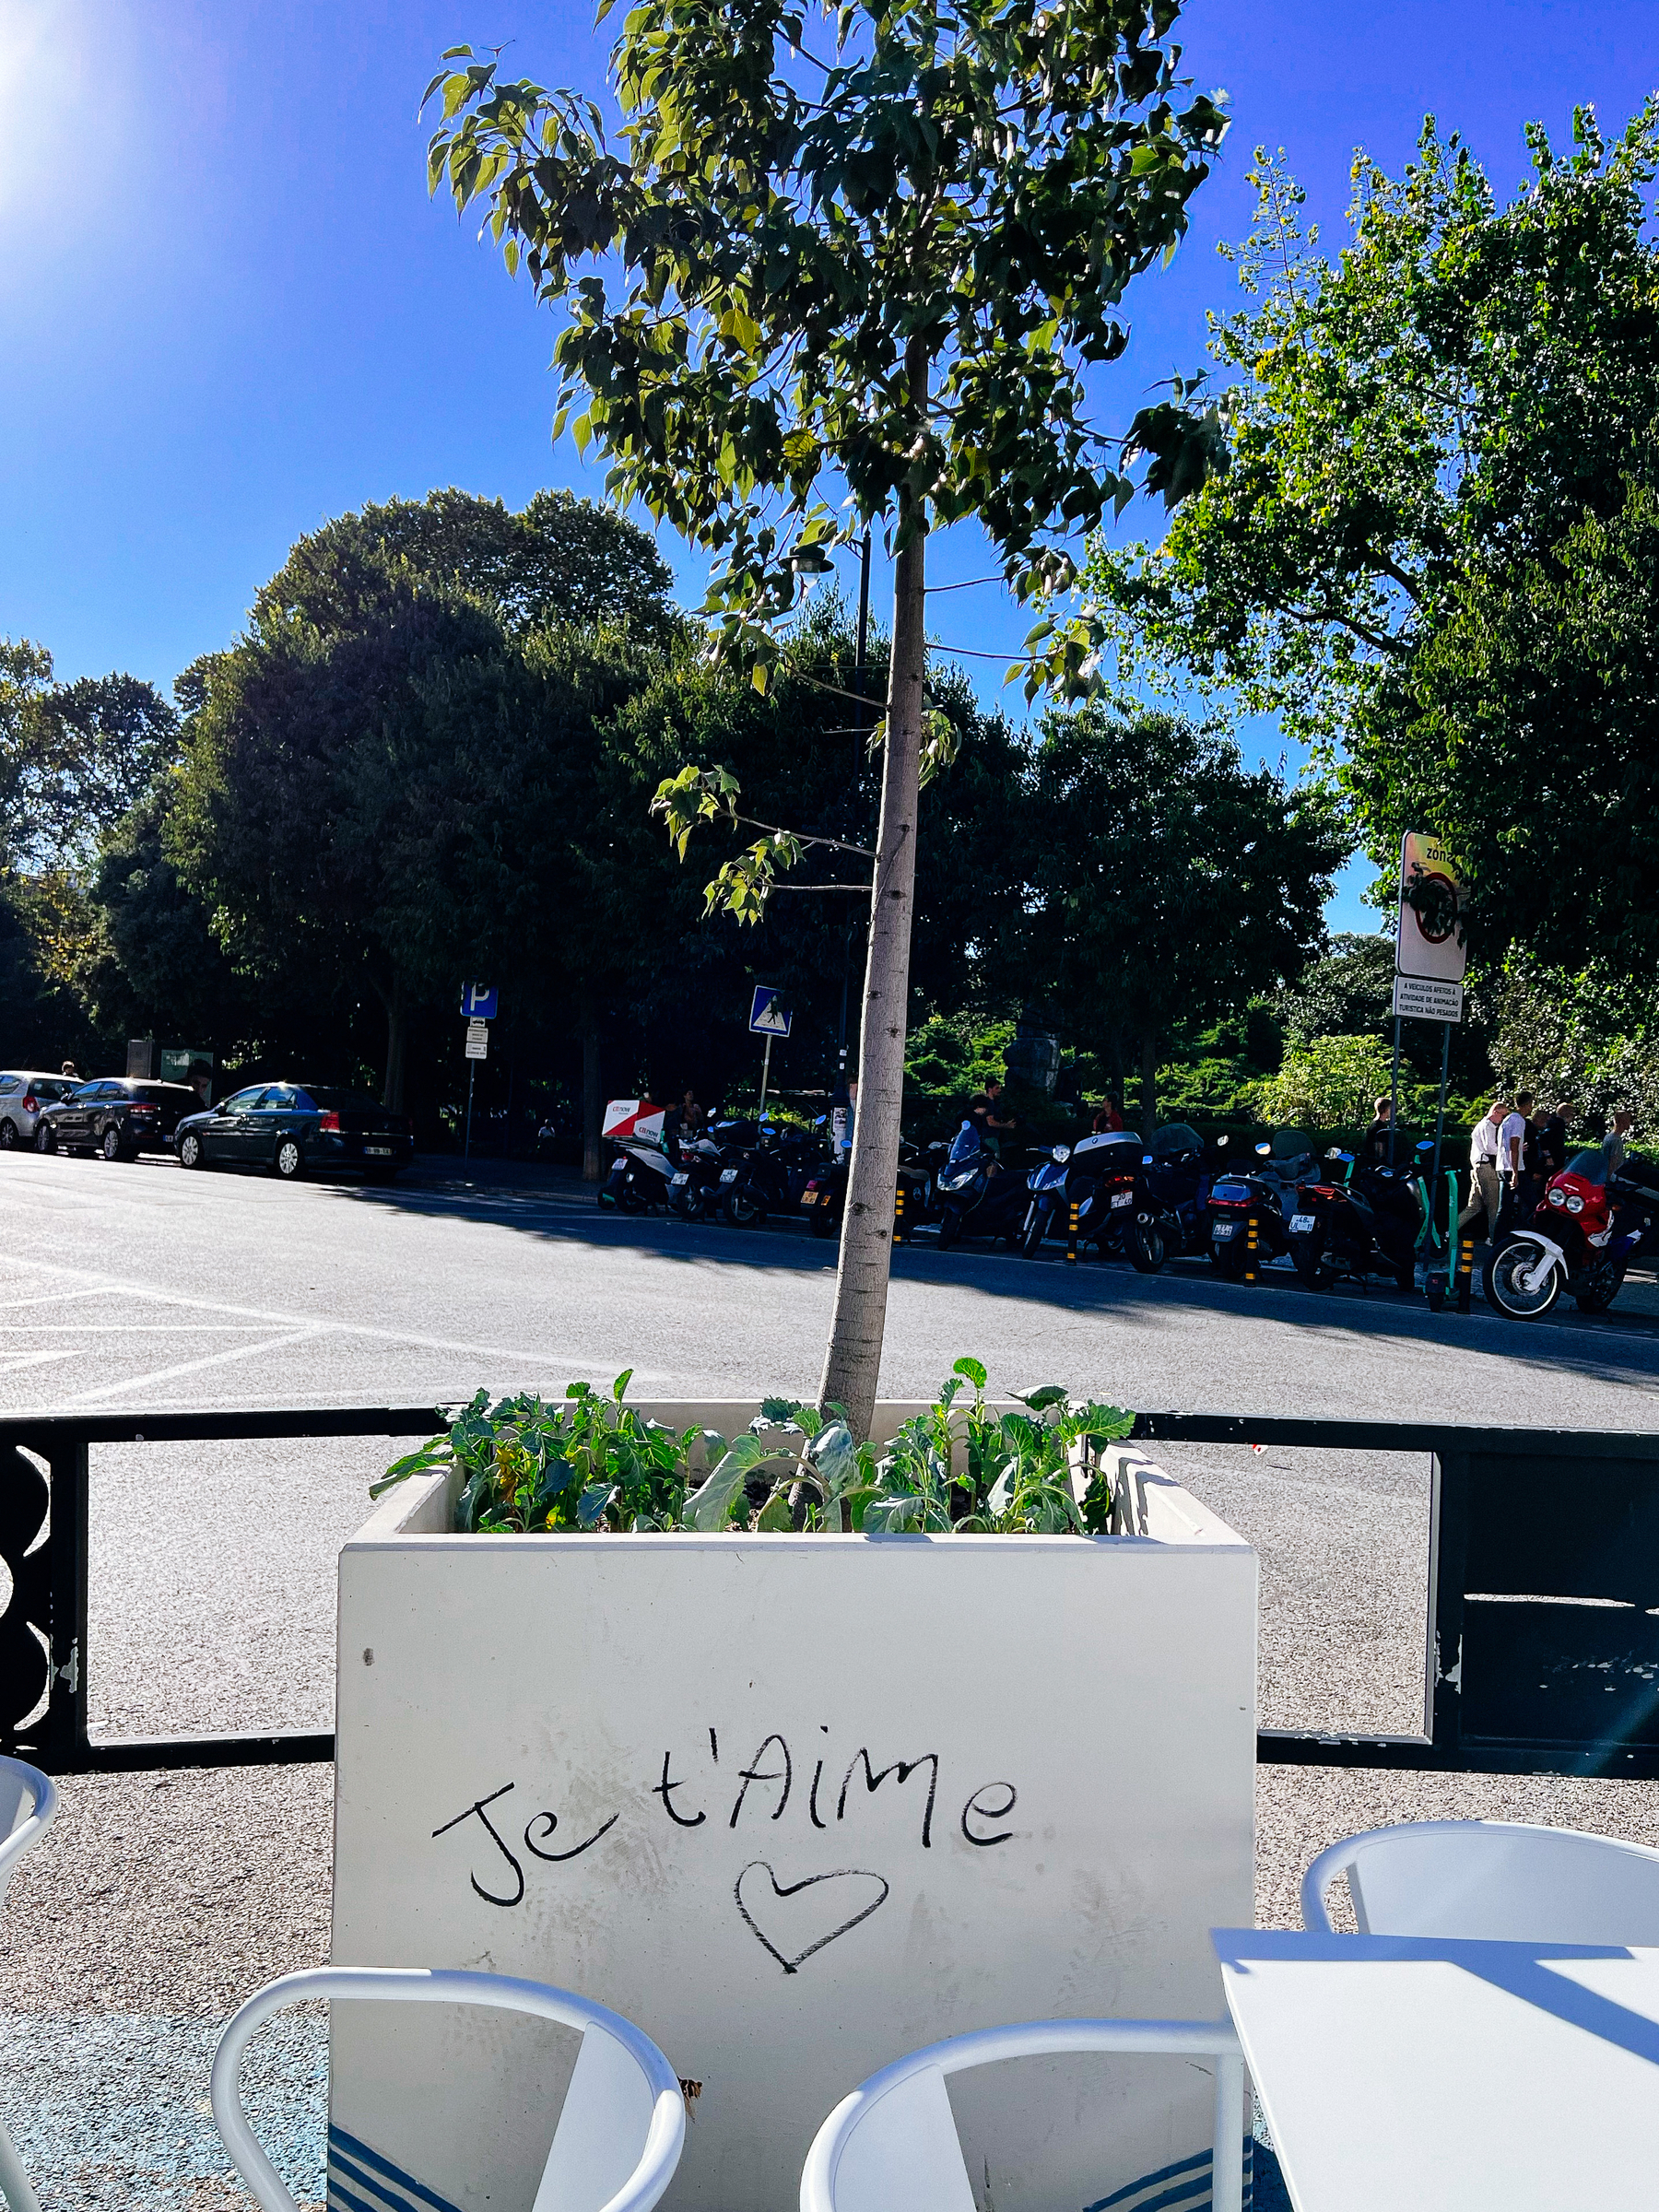 a potted plant in the city. Written on the pot: Je t’aime.